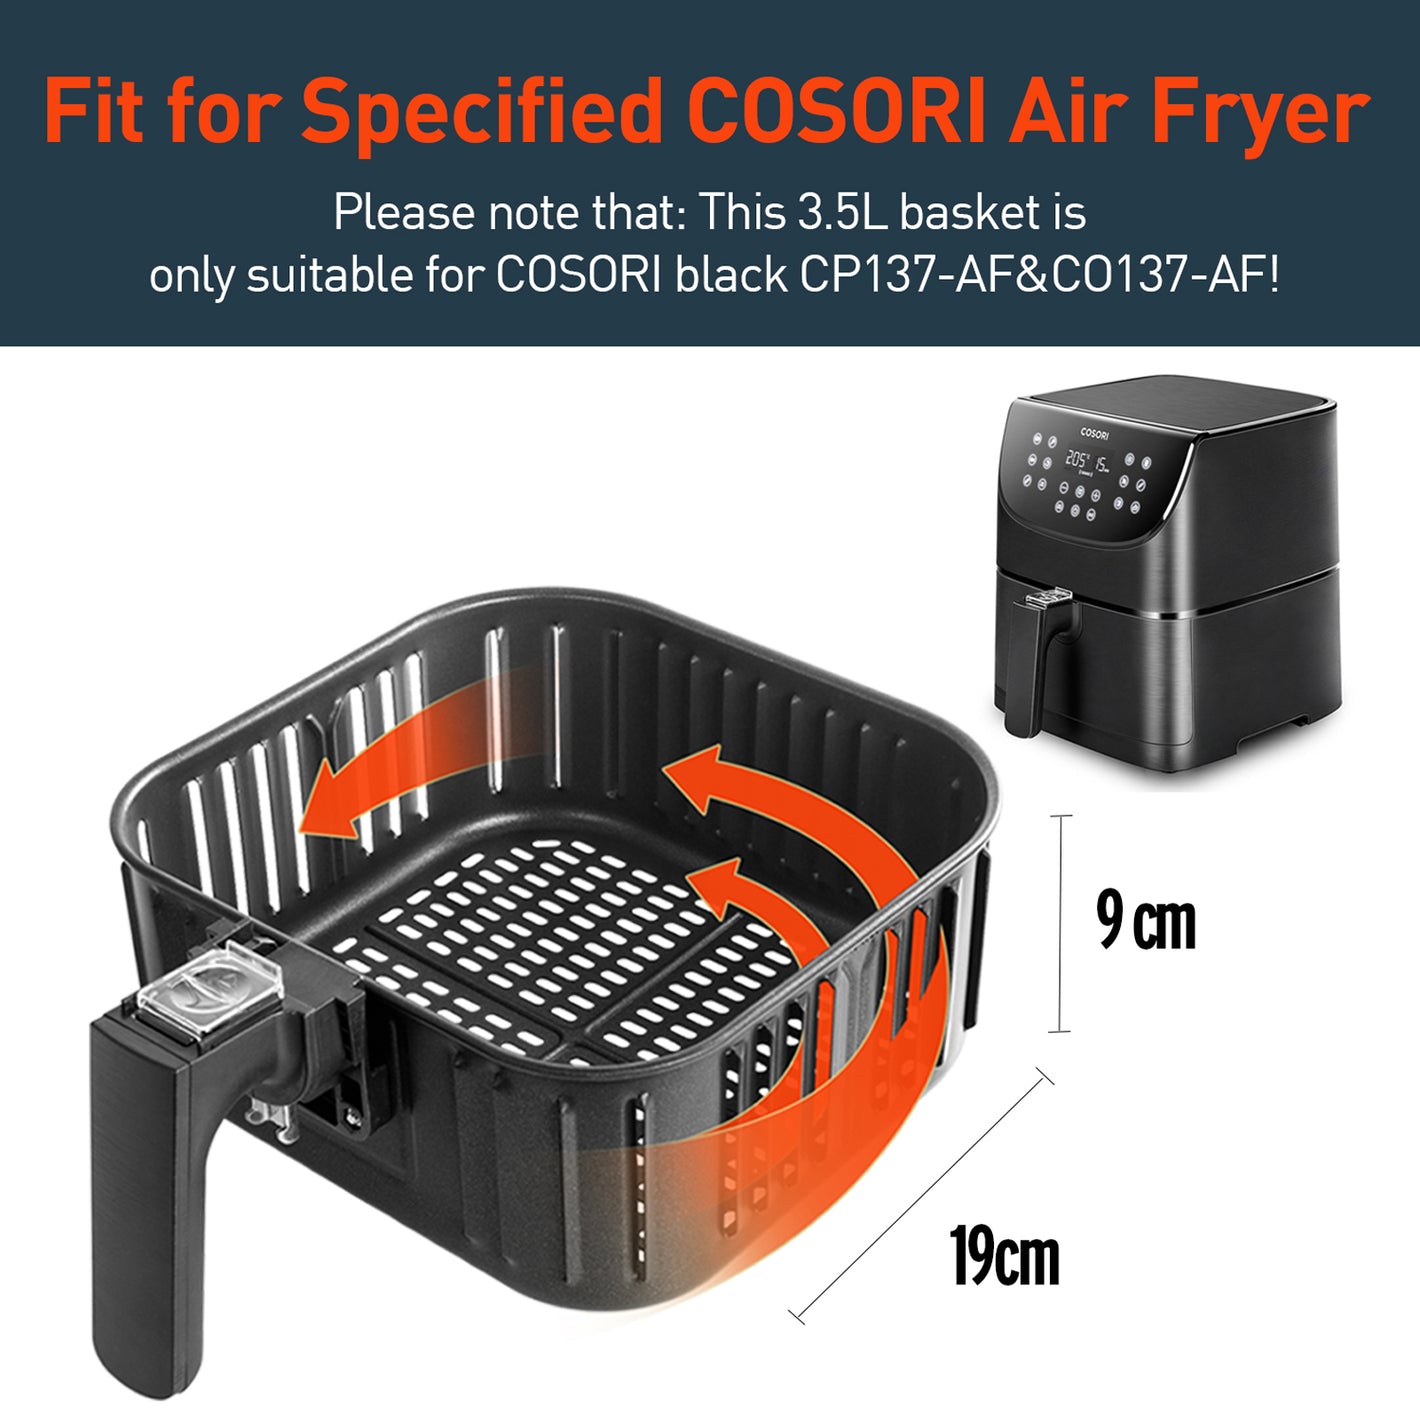 Fit for Specified COSORI Air Fryer  Please note that: This 3.5L basket is only suitable for COSORI black CP137-AF&CO137-AF!